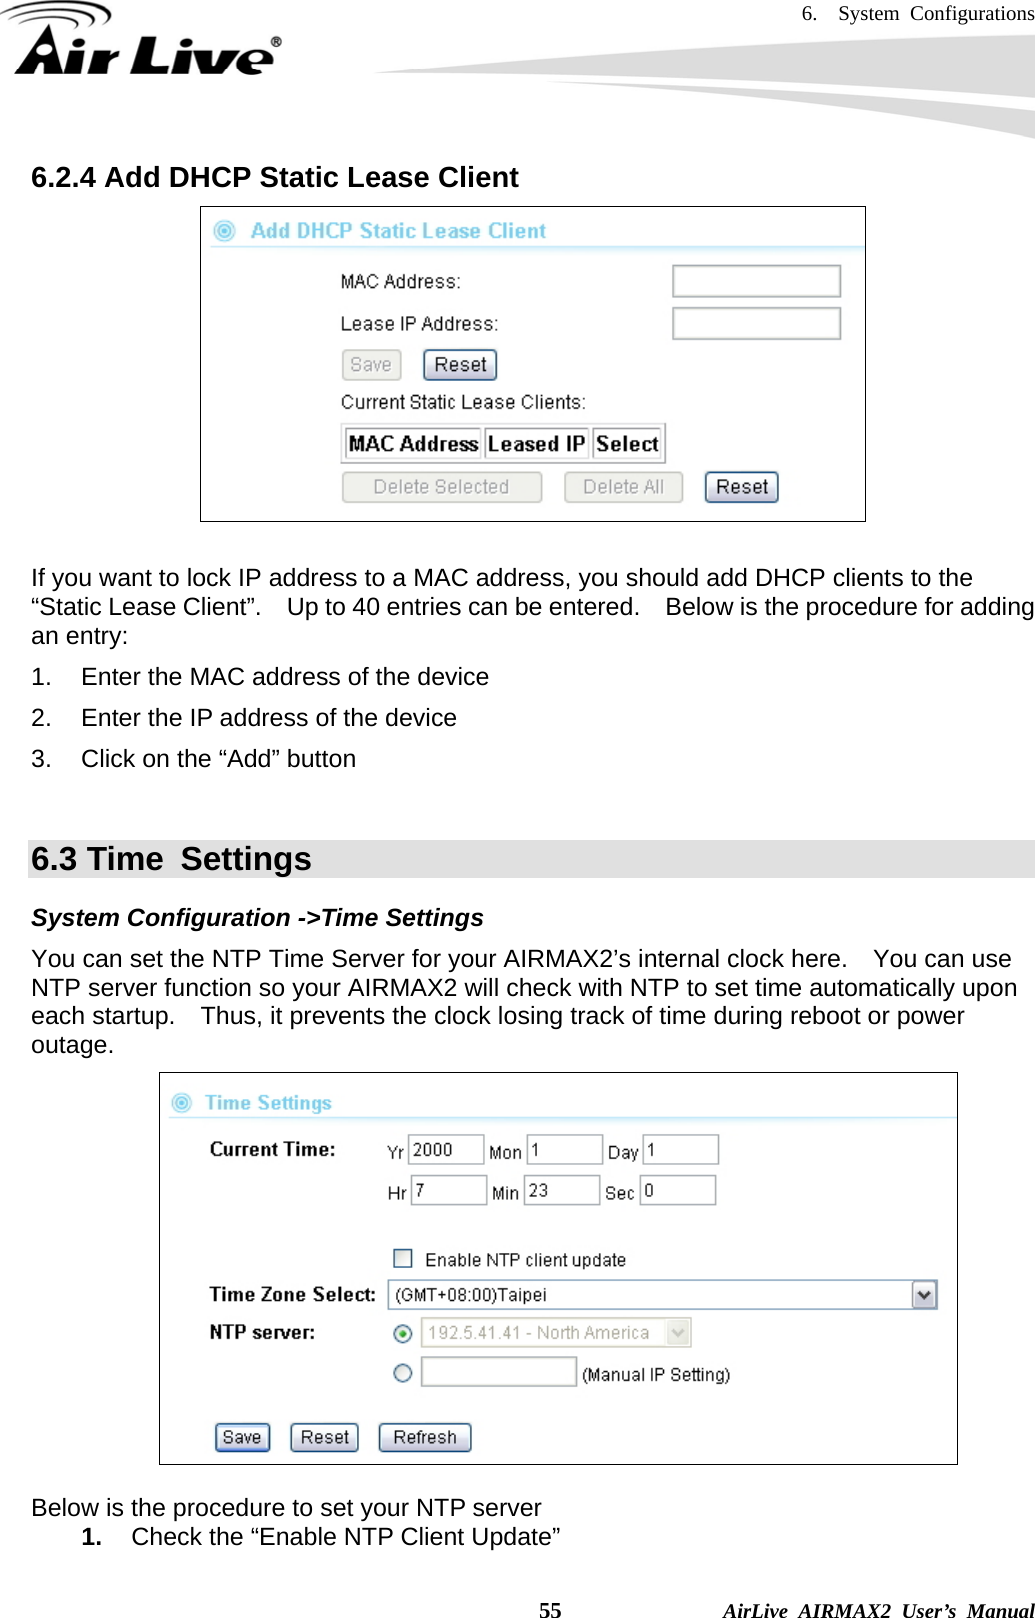 6.  System Configurations    55              AirLive AIRMAX2 User’s Manual 6.2.4 Add DHCP Static Lease Client   If you want to lock IP address to a MAC address, you should add DHCP clients to the “Static Lease Client”.    Up to 40 entries can be entered.  Below is the procedure for adding an entry: 1.  Enter the MAC address of the device 2.  Enter the IP address of the device 3.  Click on the “Add” button  6.3 Time  Settings System Configuration -&gt;Time Settings You can set the NTP Time Server for your AIRMAX2’s internal clock here.    You can use NTP server function so your AIRMAX2 will check with NTP to set time automatically upon each startup.    Thus, it prevents the clock losing track of time during reboot or power outage.    Below is the procedure to set your NTP server 1.  Check the “Enable NTP Client Update” 